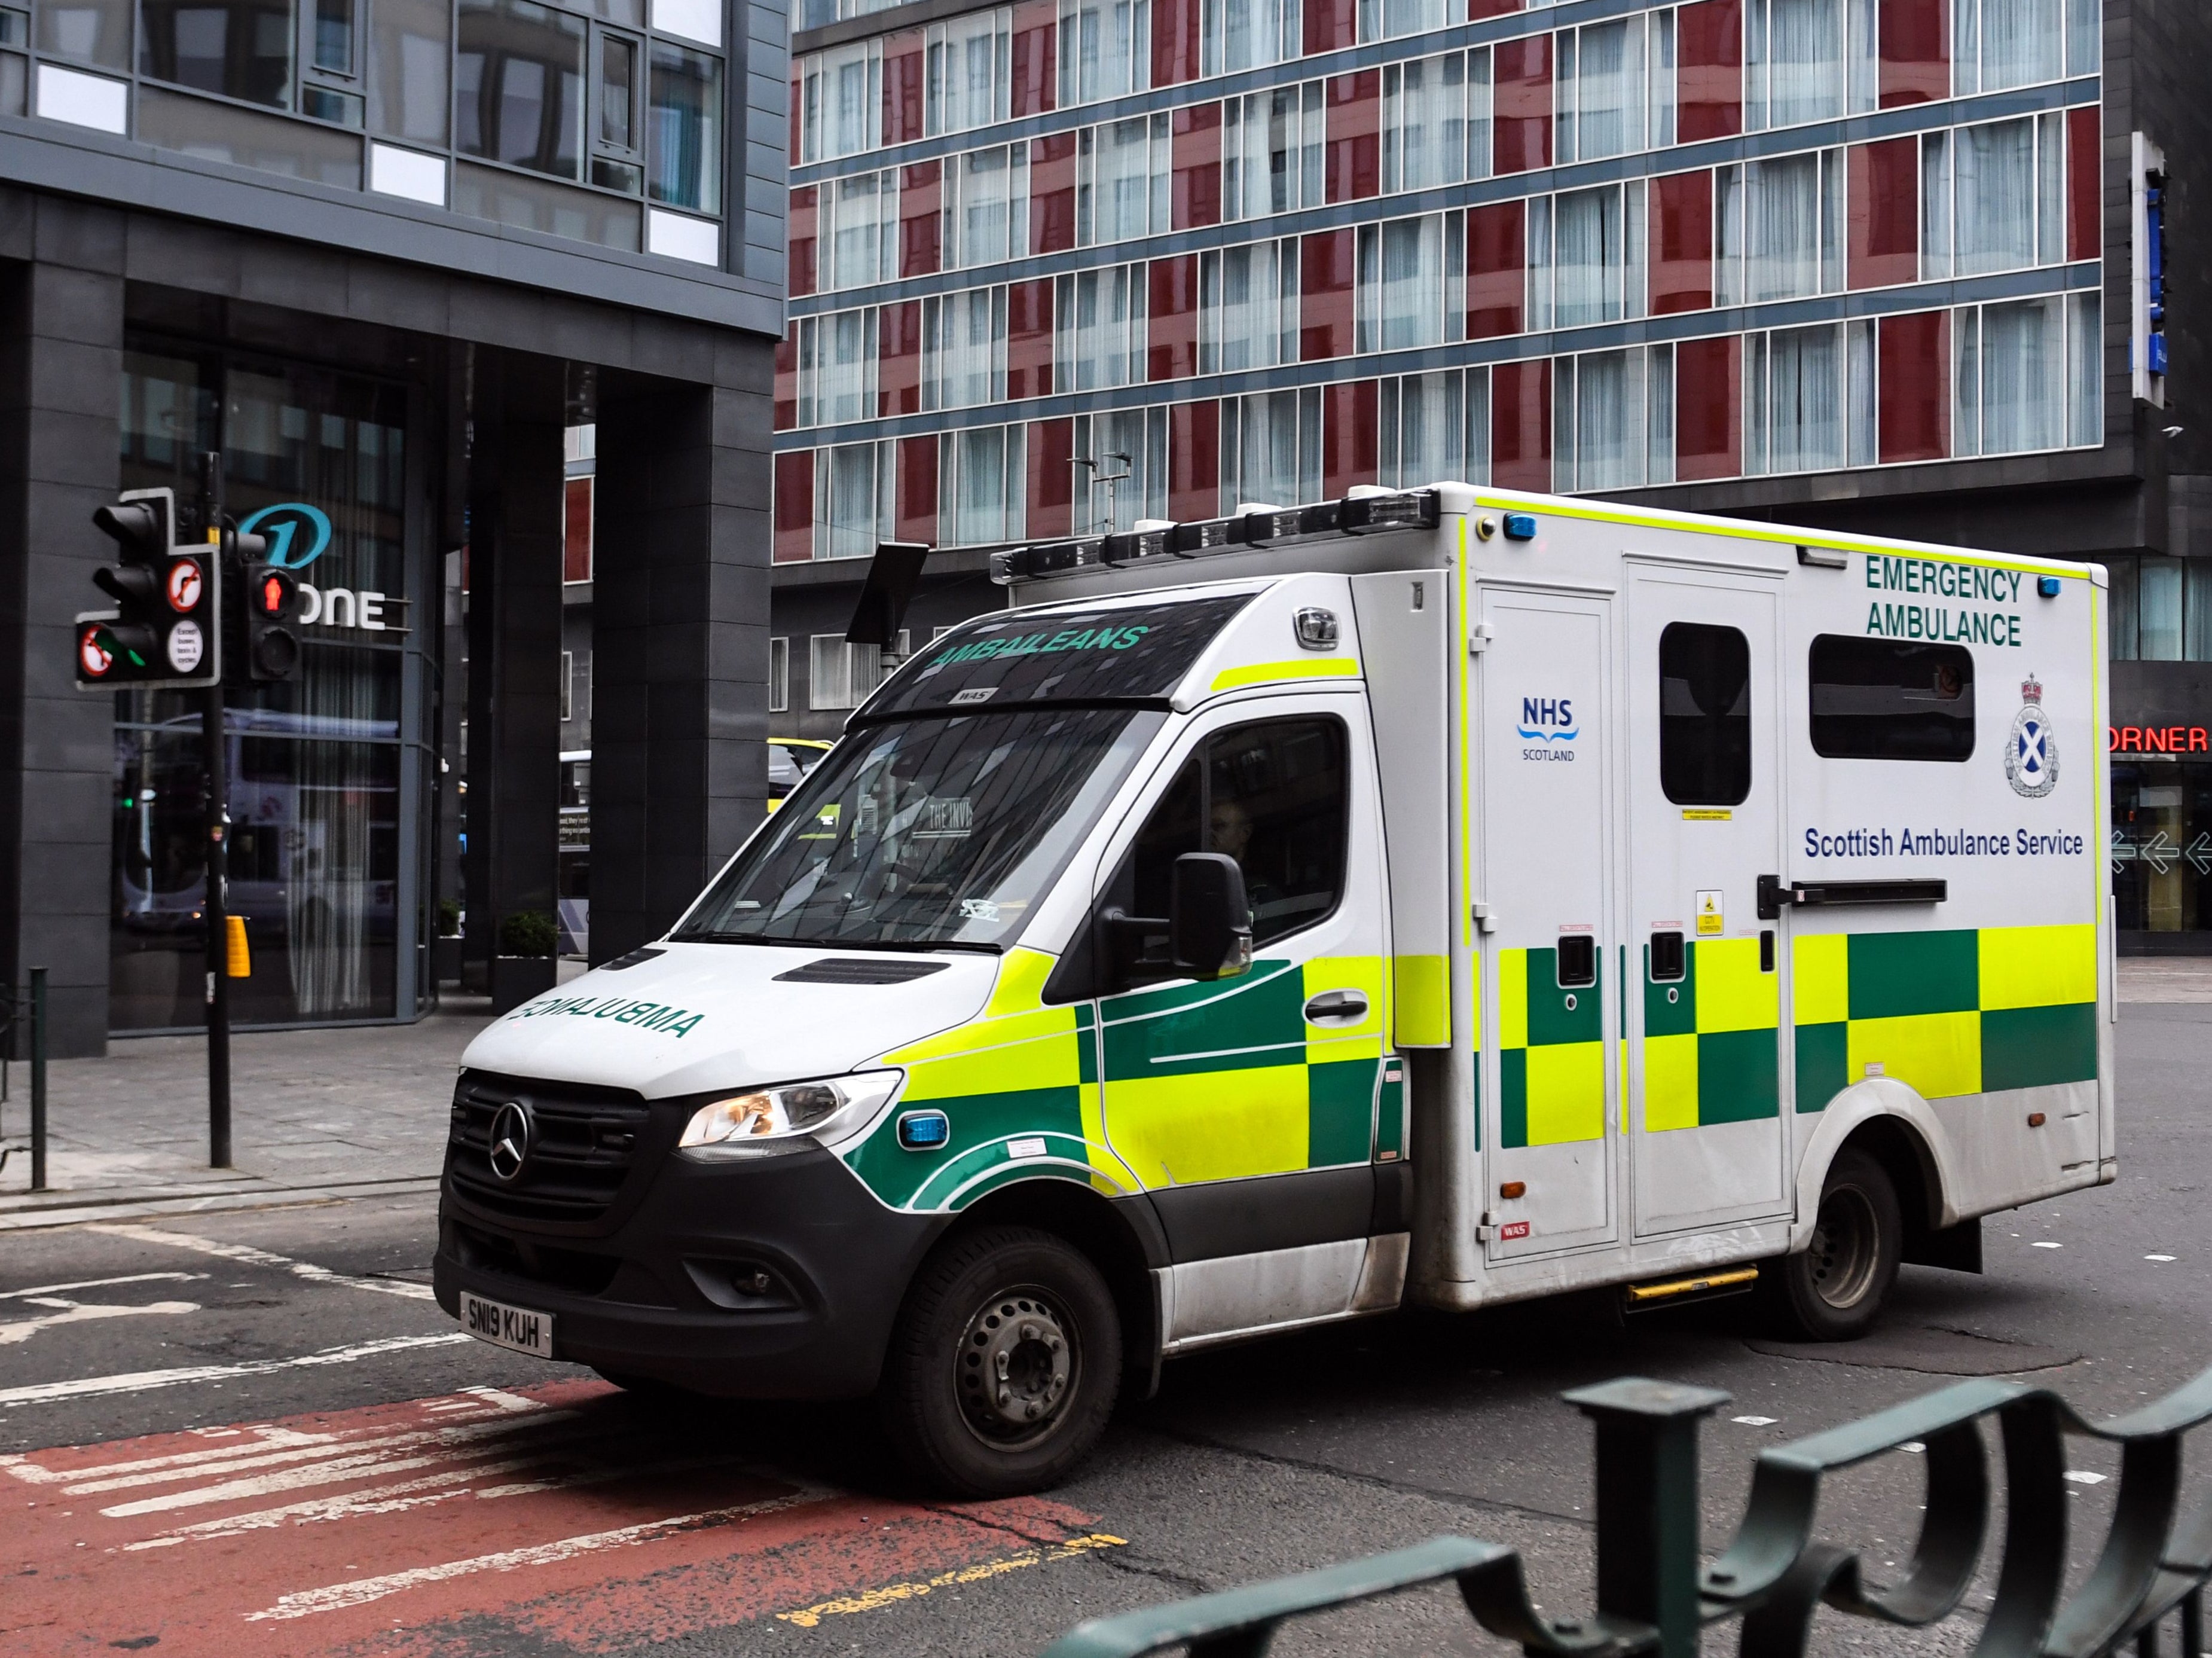 An ambulance travels through Glasgow city centre during the first coronavirus lockdown in March 2020